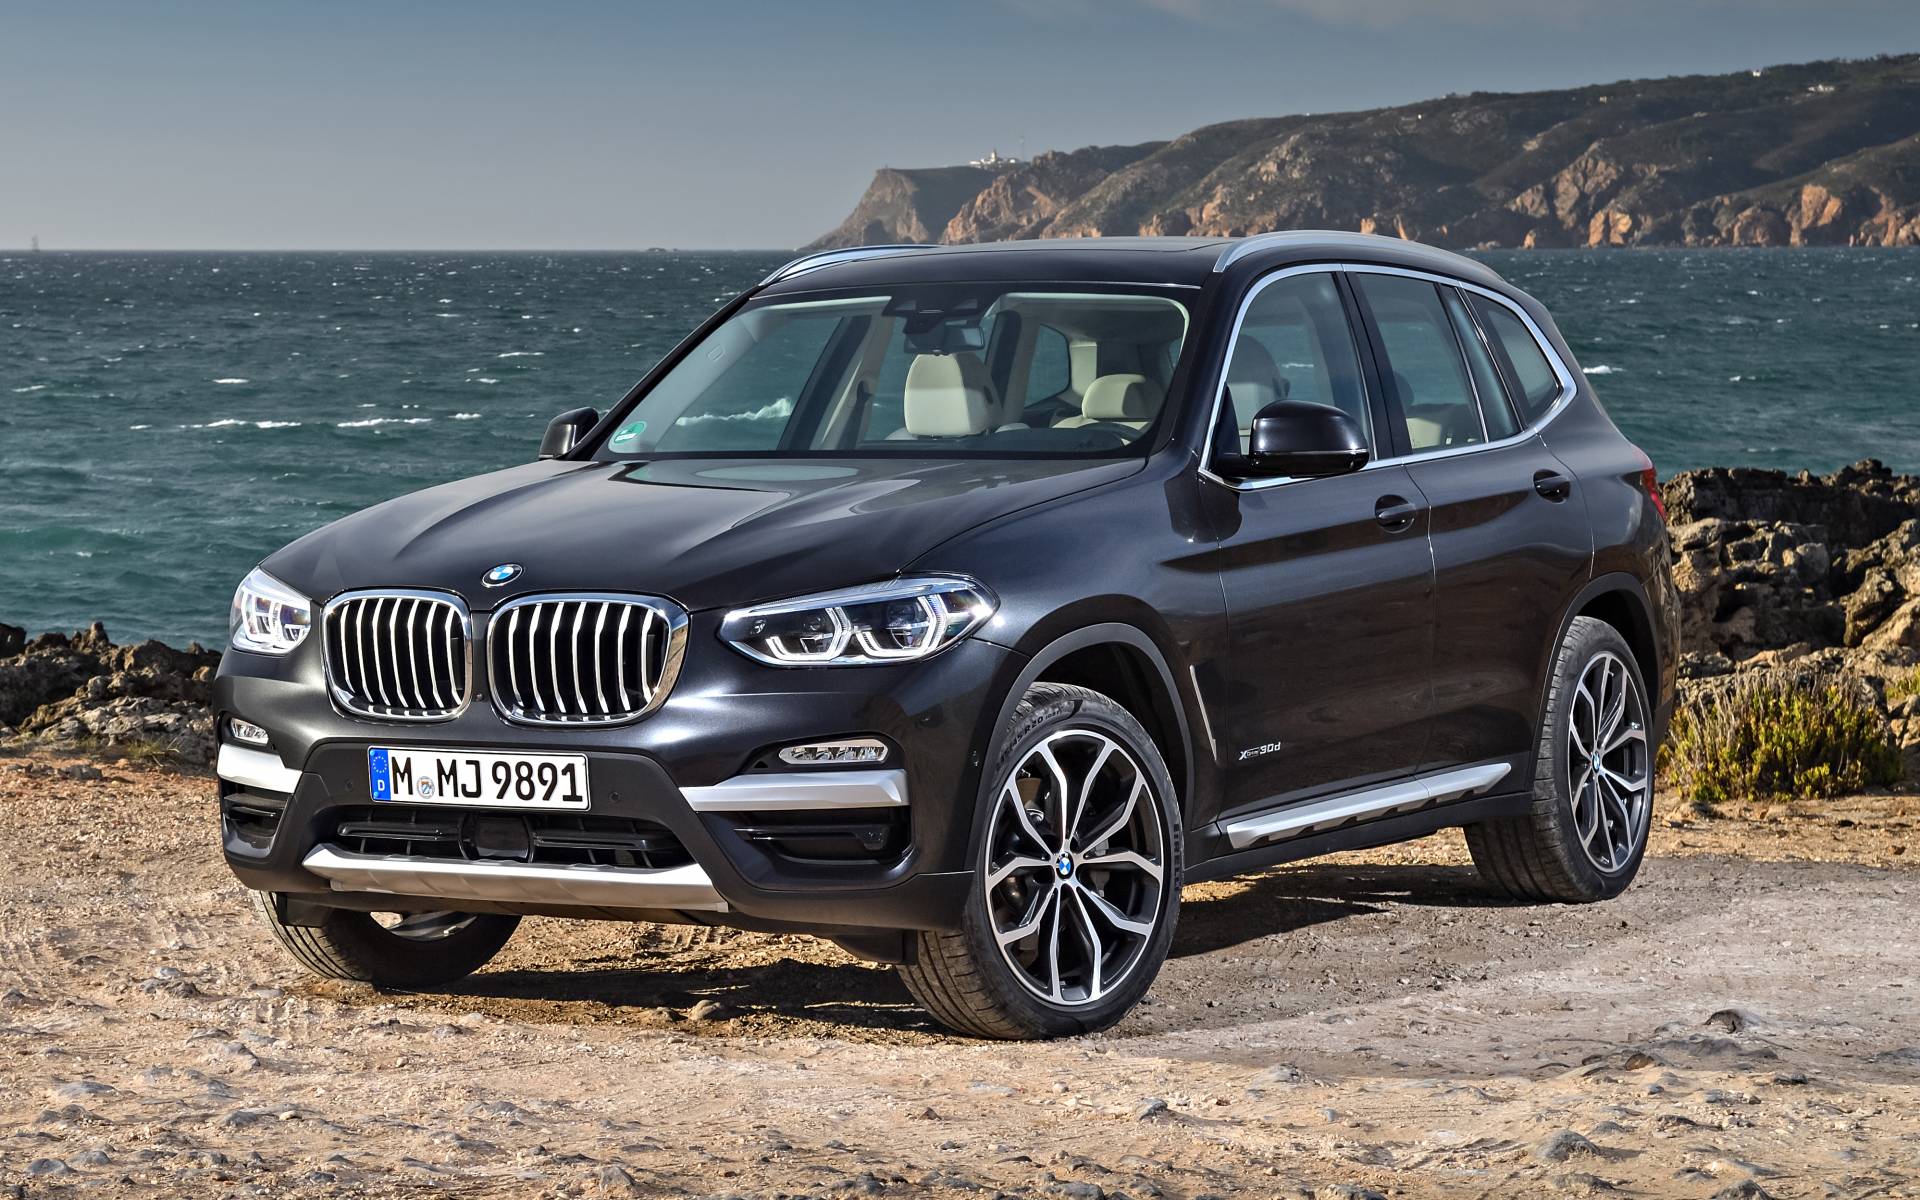 2020 BMW X3 - News, reviews, picture galleries and videos - The Car Guide